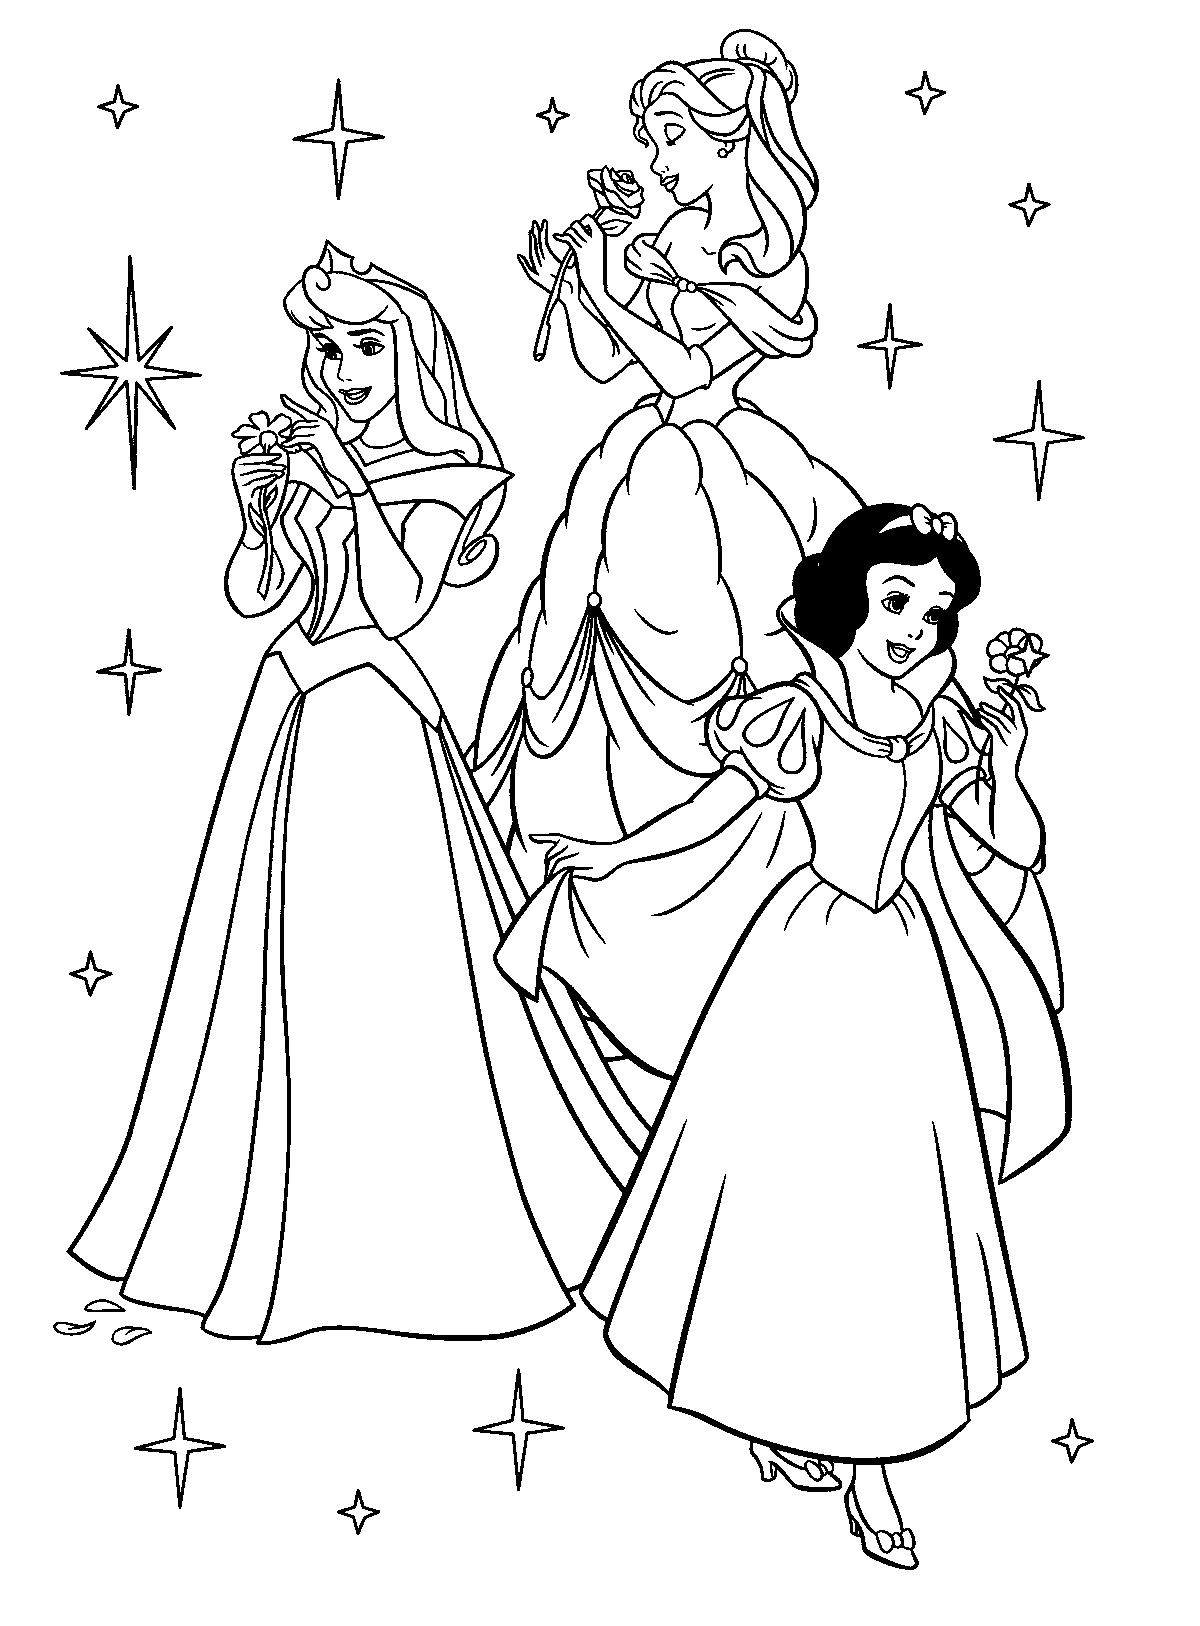 6 Best Images Of Princess Coloring Printables Disney Princess Coloring Pages Disney Princess